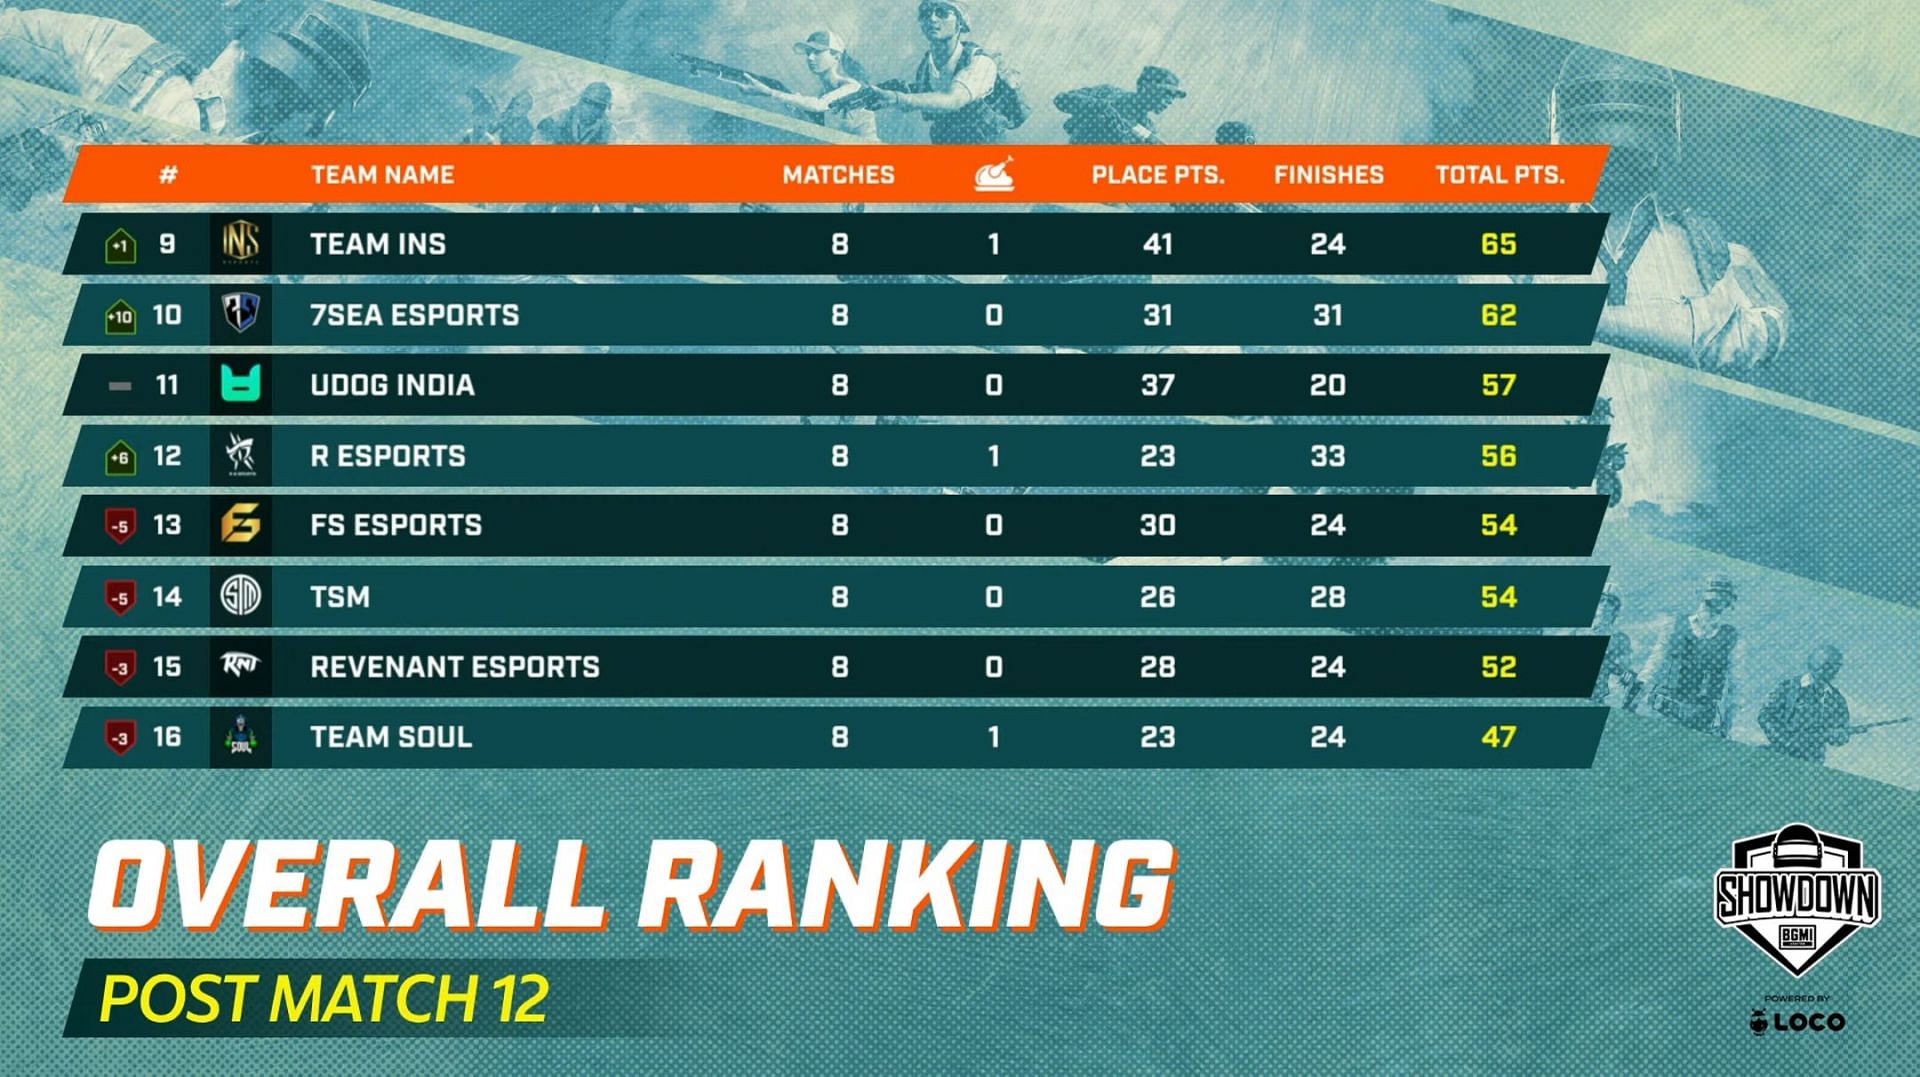 7Sea finished 10th after consistent performances after Day 2 (Image via BGMI)